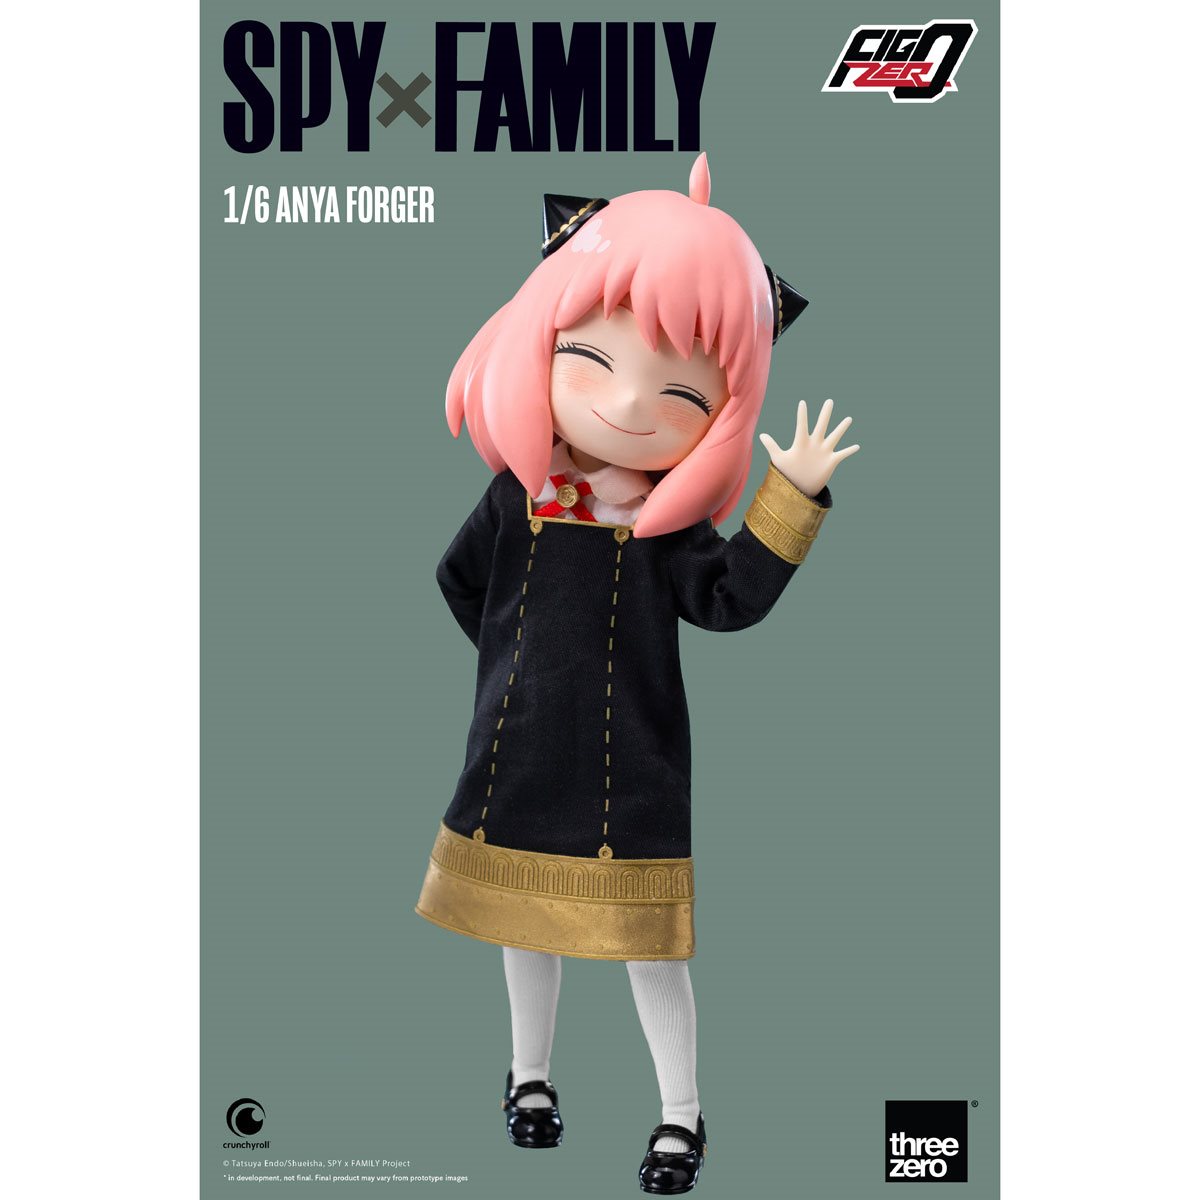 SPY x FAMILY ANAY FORGER No.21 Japanese Collectable Clear Card